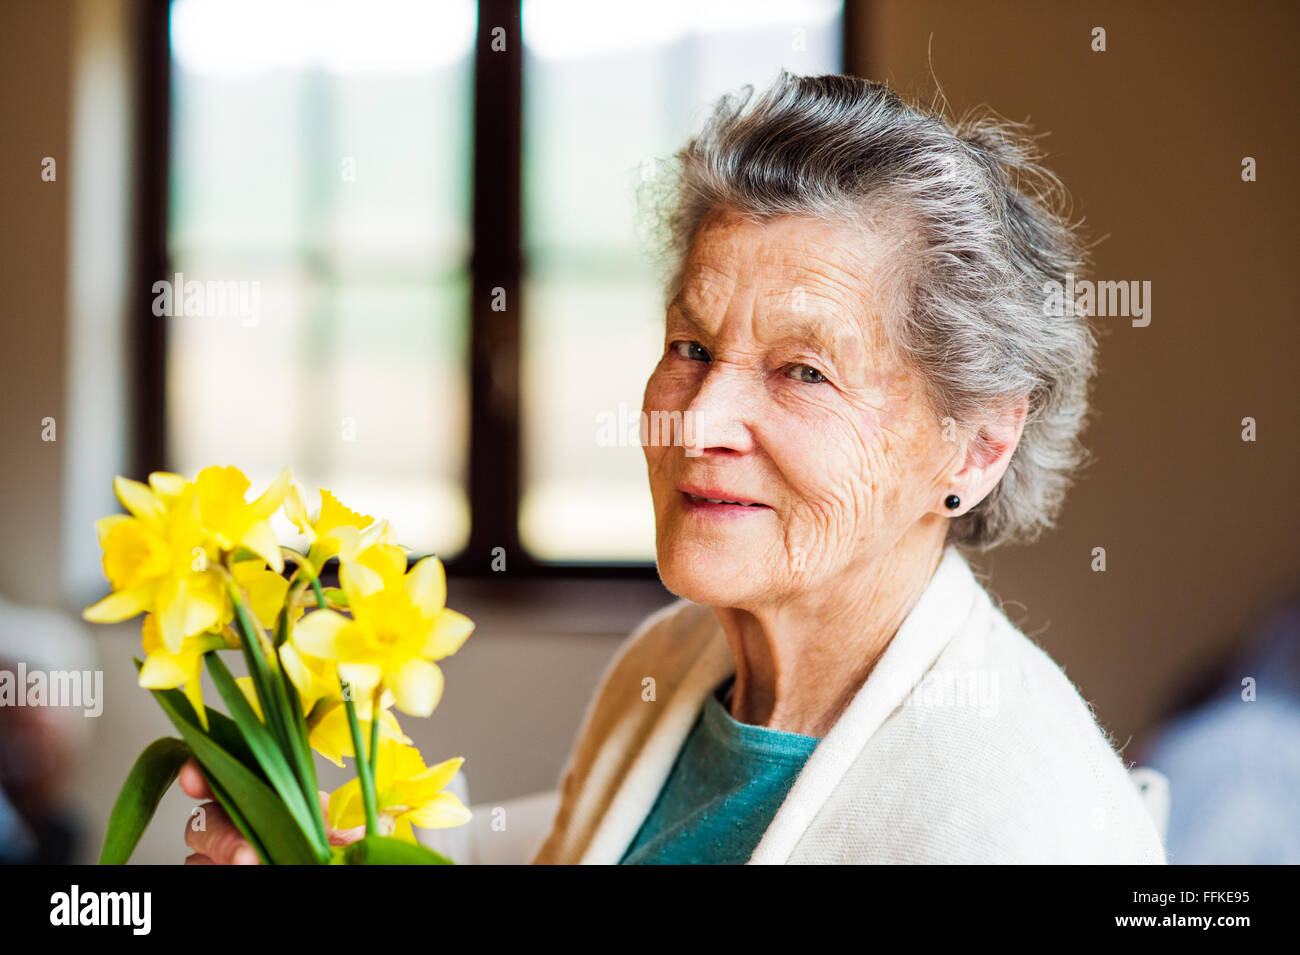 Senior woman by the window holding bouquet of daffodils Stock Photo